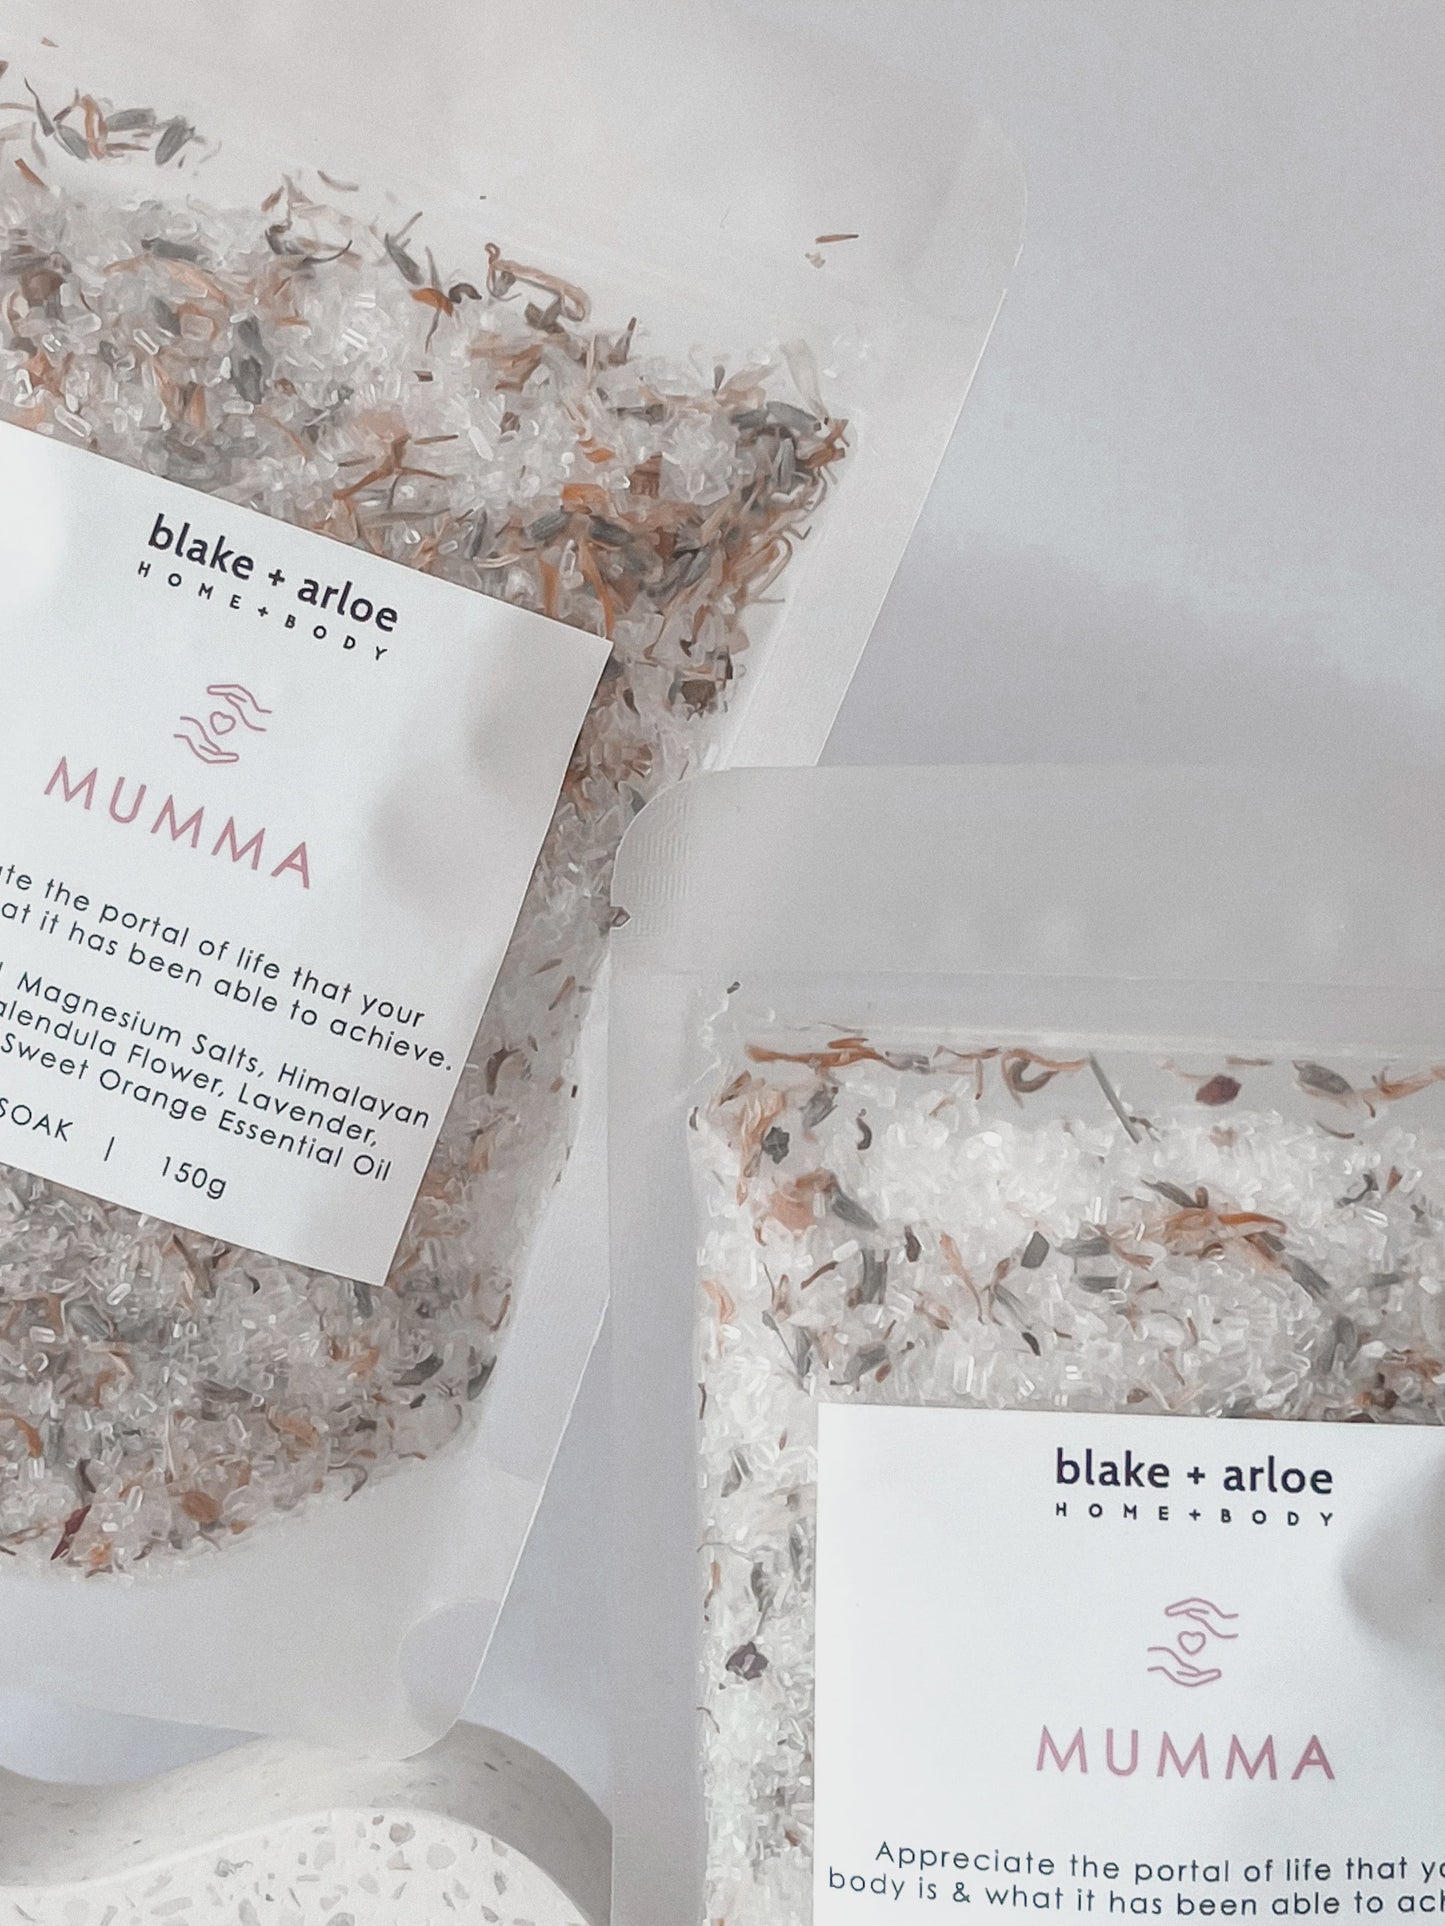 Indulge in a deliciously scented bath with our Mumma bath soak! Made with natural ingredients, this 150g soak will leave you feeling refreshed and rejuvenated. Time to soak up some fruity goodness!